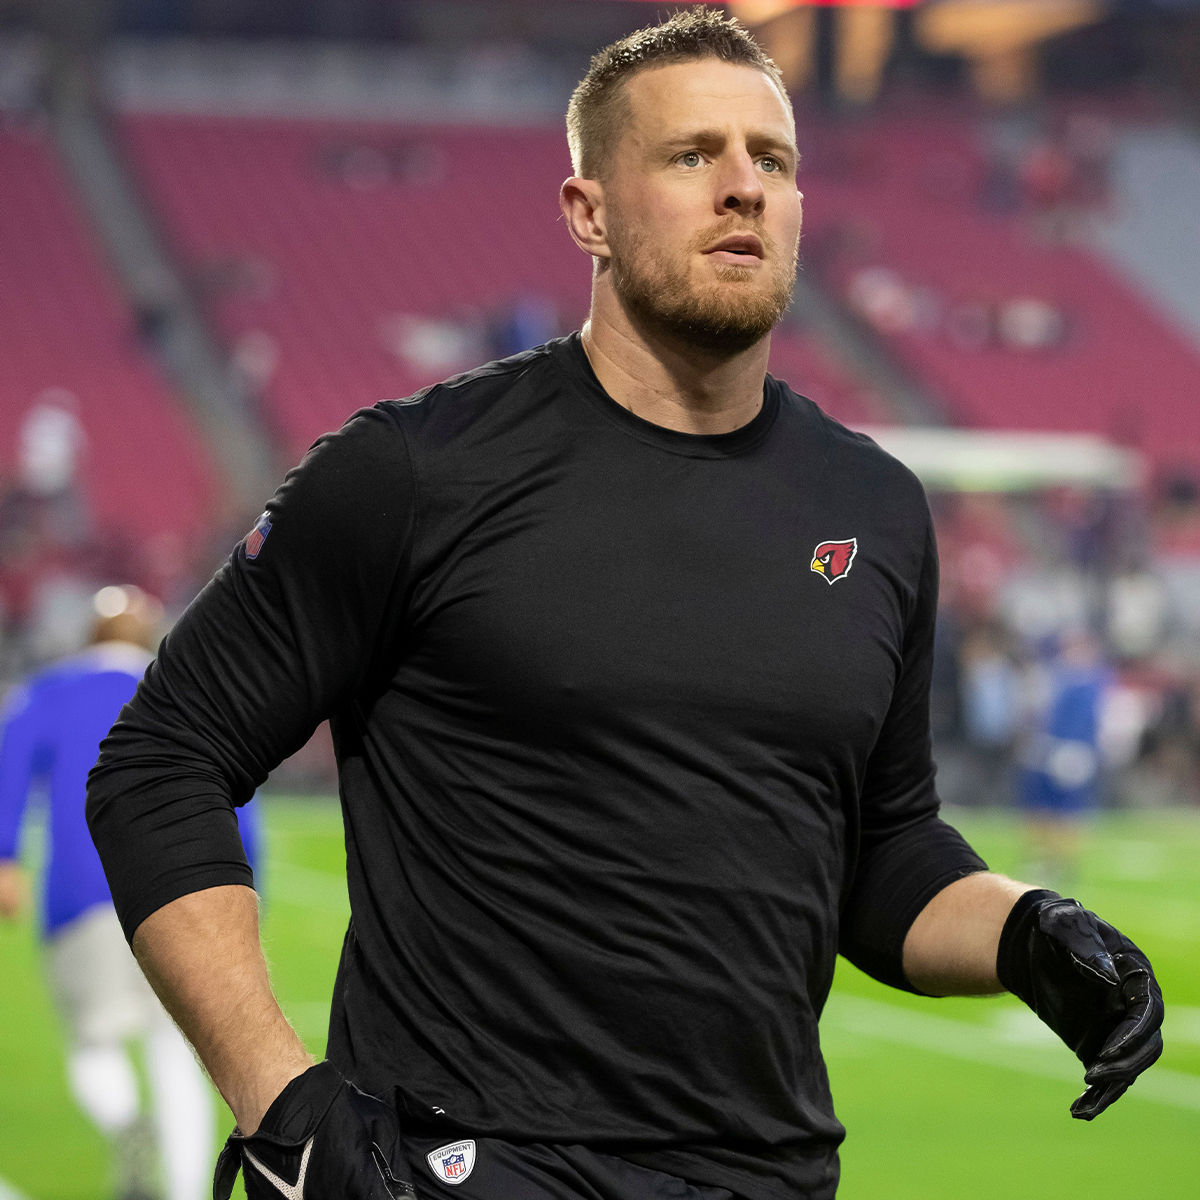 Why J.J. Watt Quickly Returned to NFL After “Emotional” Health Scare